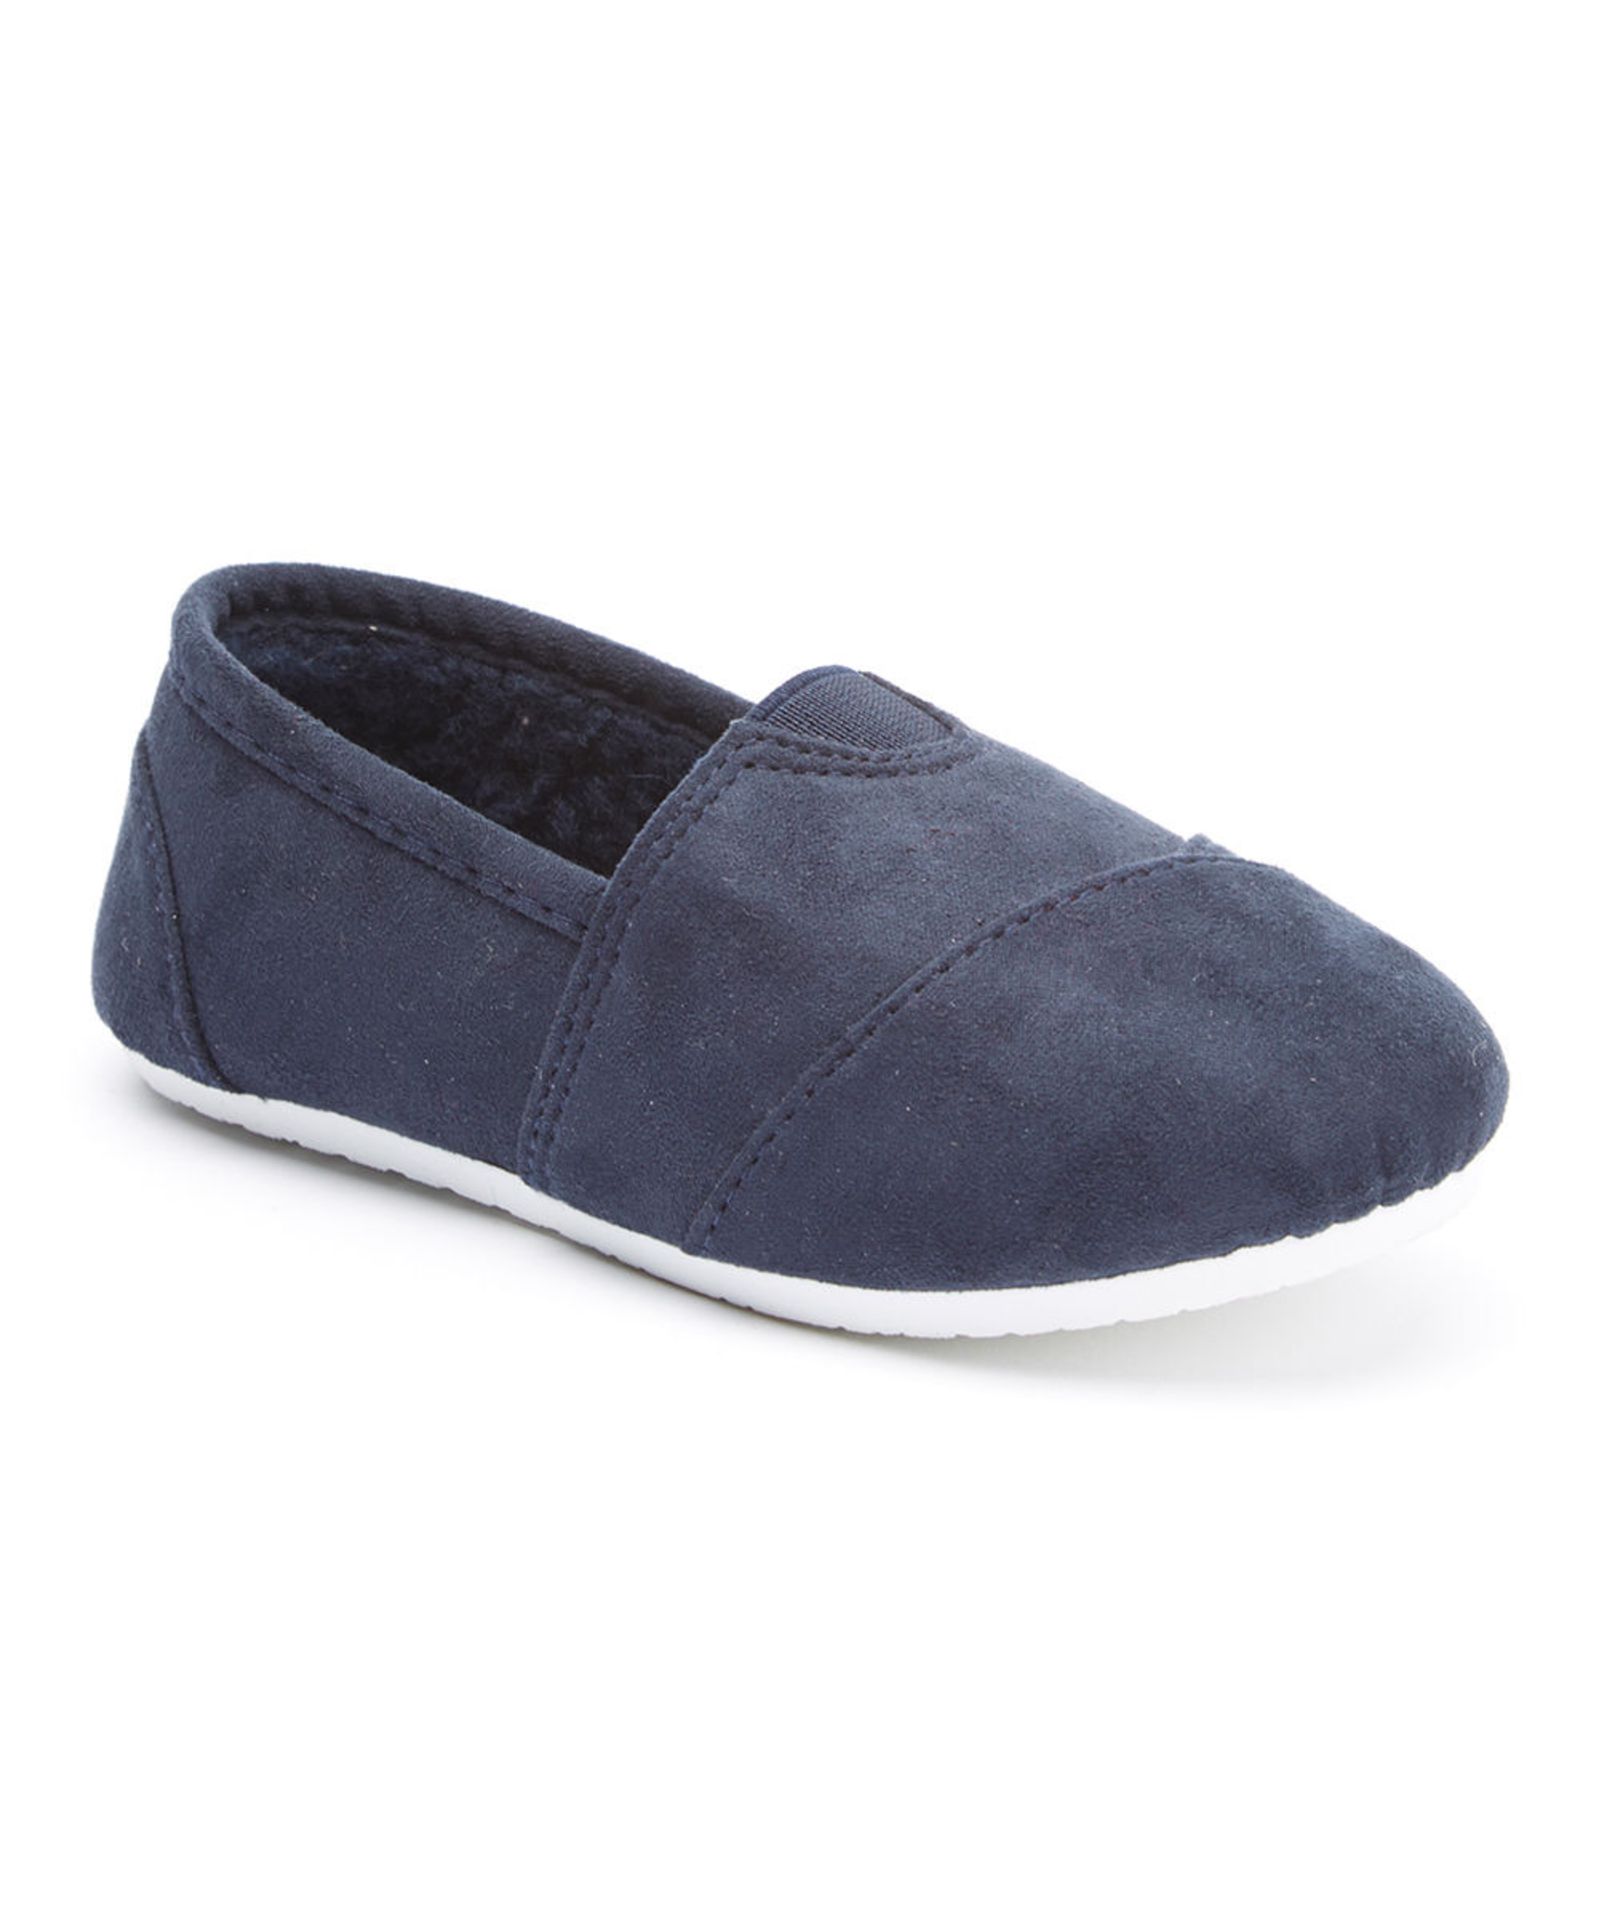 Ositos, Navy Faux Fur Tammy Slip-On Shoe, US Toddler size 9 (New with box) [Ref: 31225579]